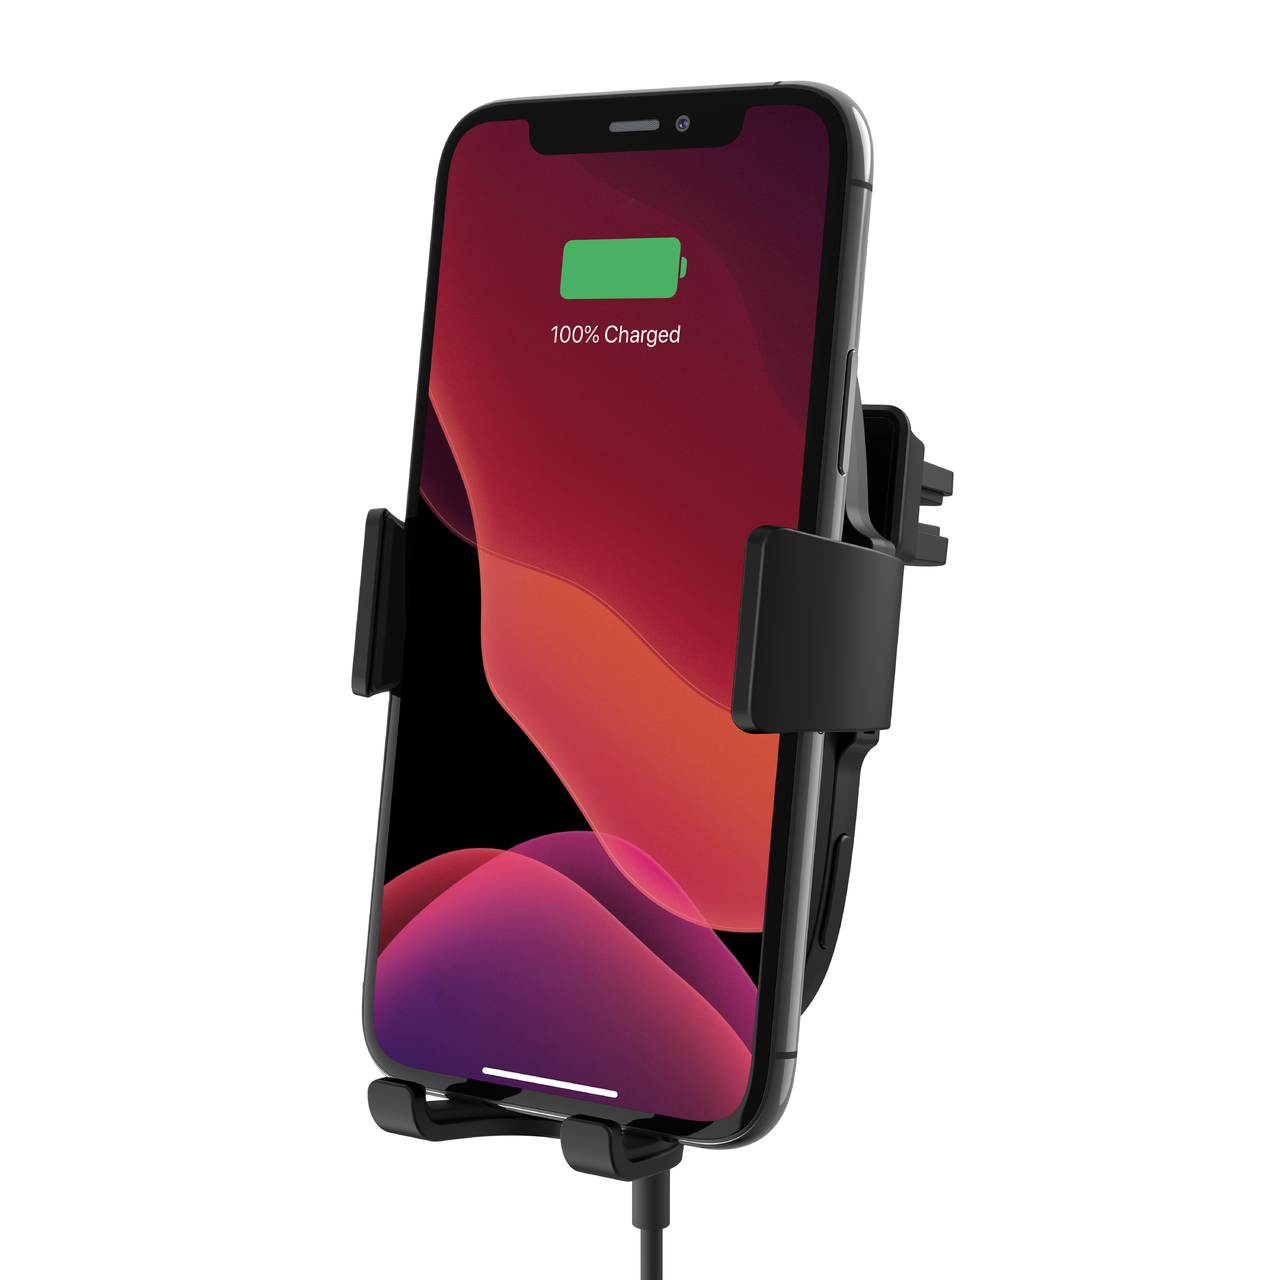 Belkin Belkin Universal Car Charger with Micro USB ChargeSync Cable 1Amp Smartphones 722868995310 